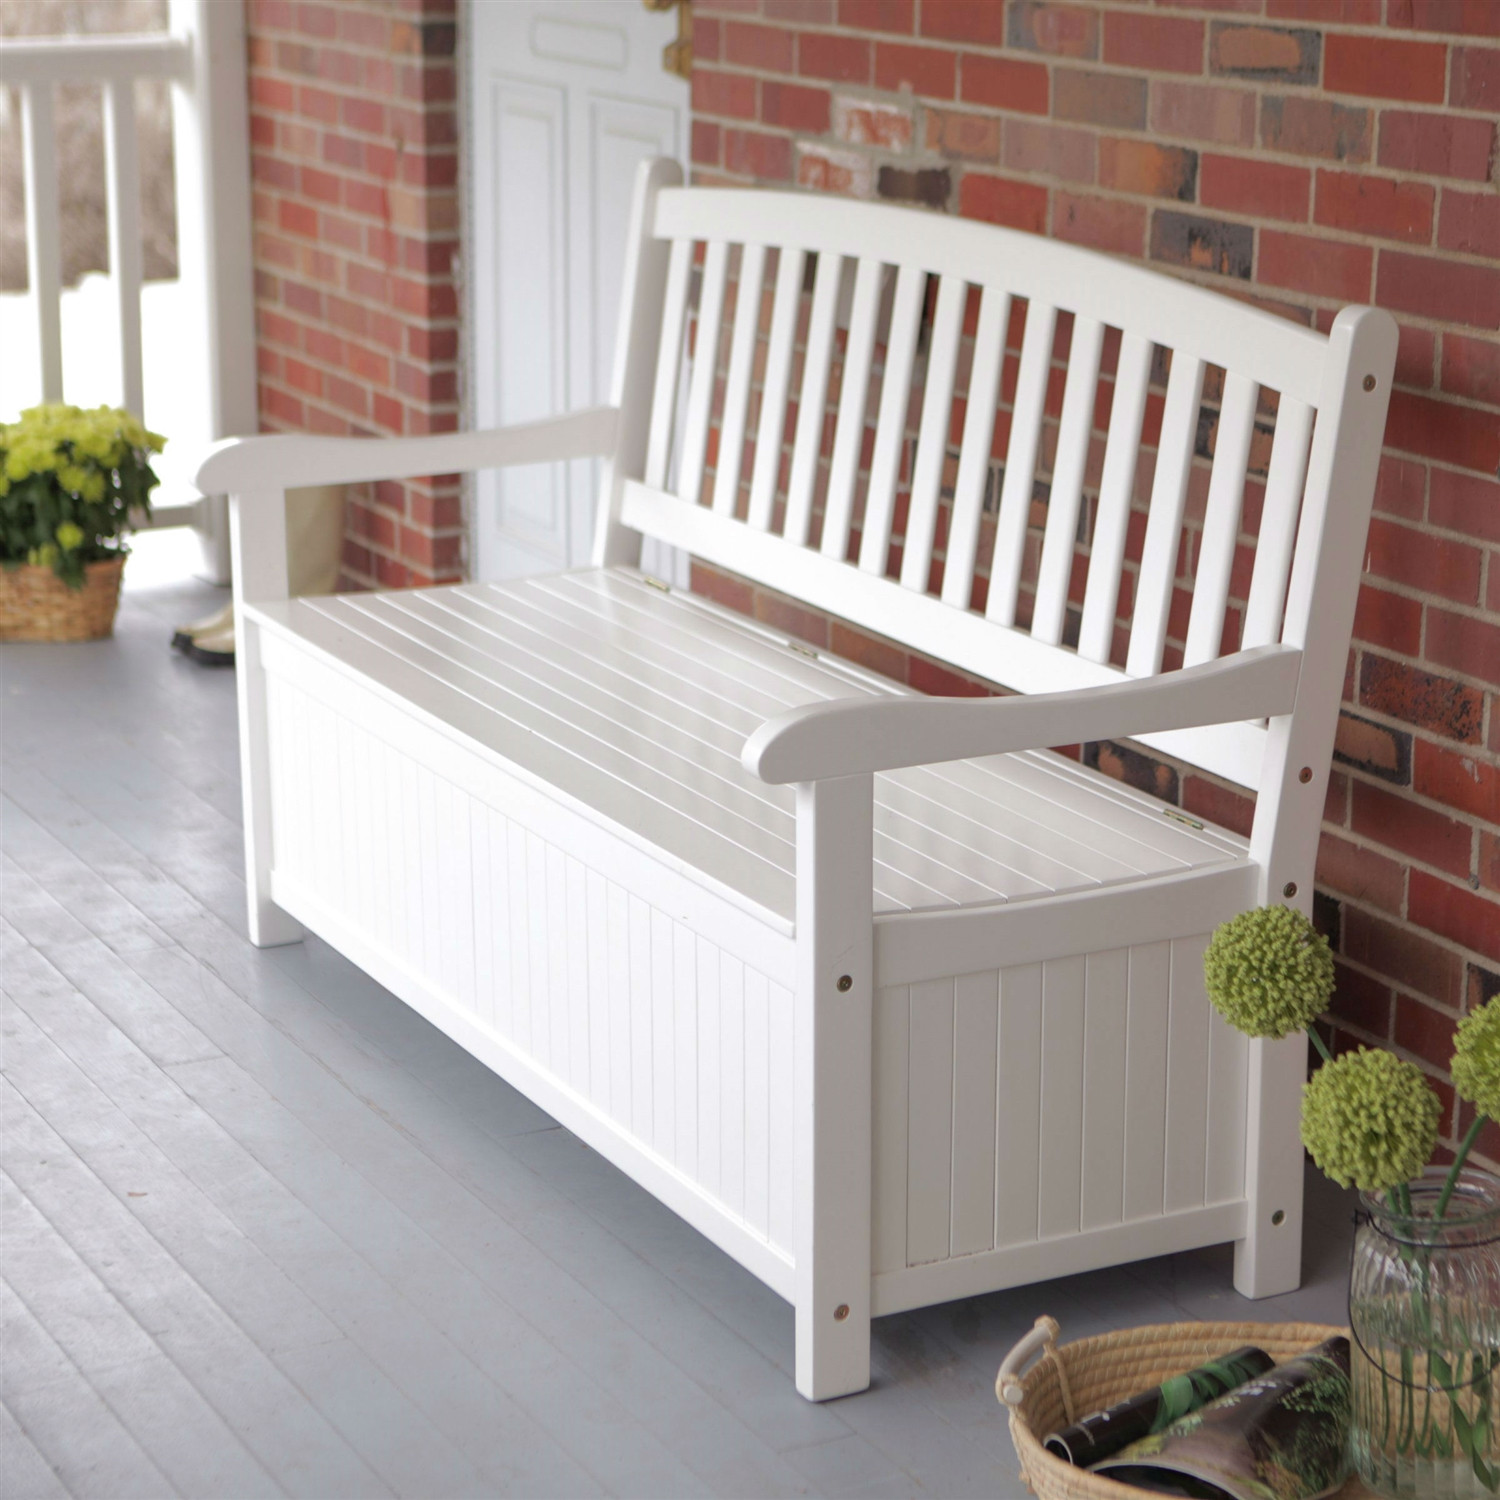 Storage Patio Benches
 White Wood 4 Ft Outdoor Patio Garden Bench Deck Box with